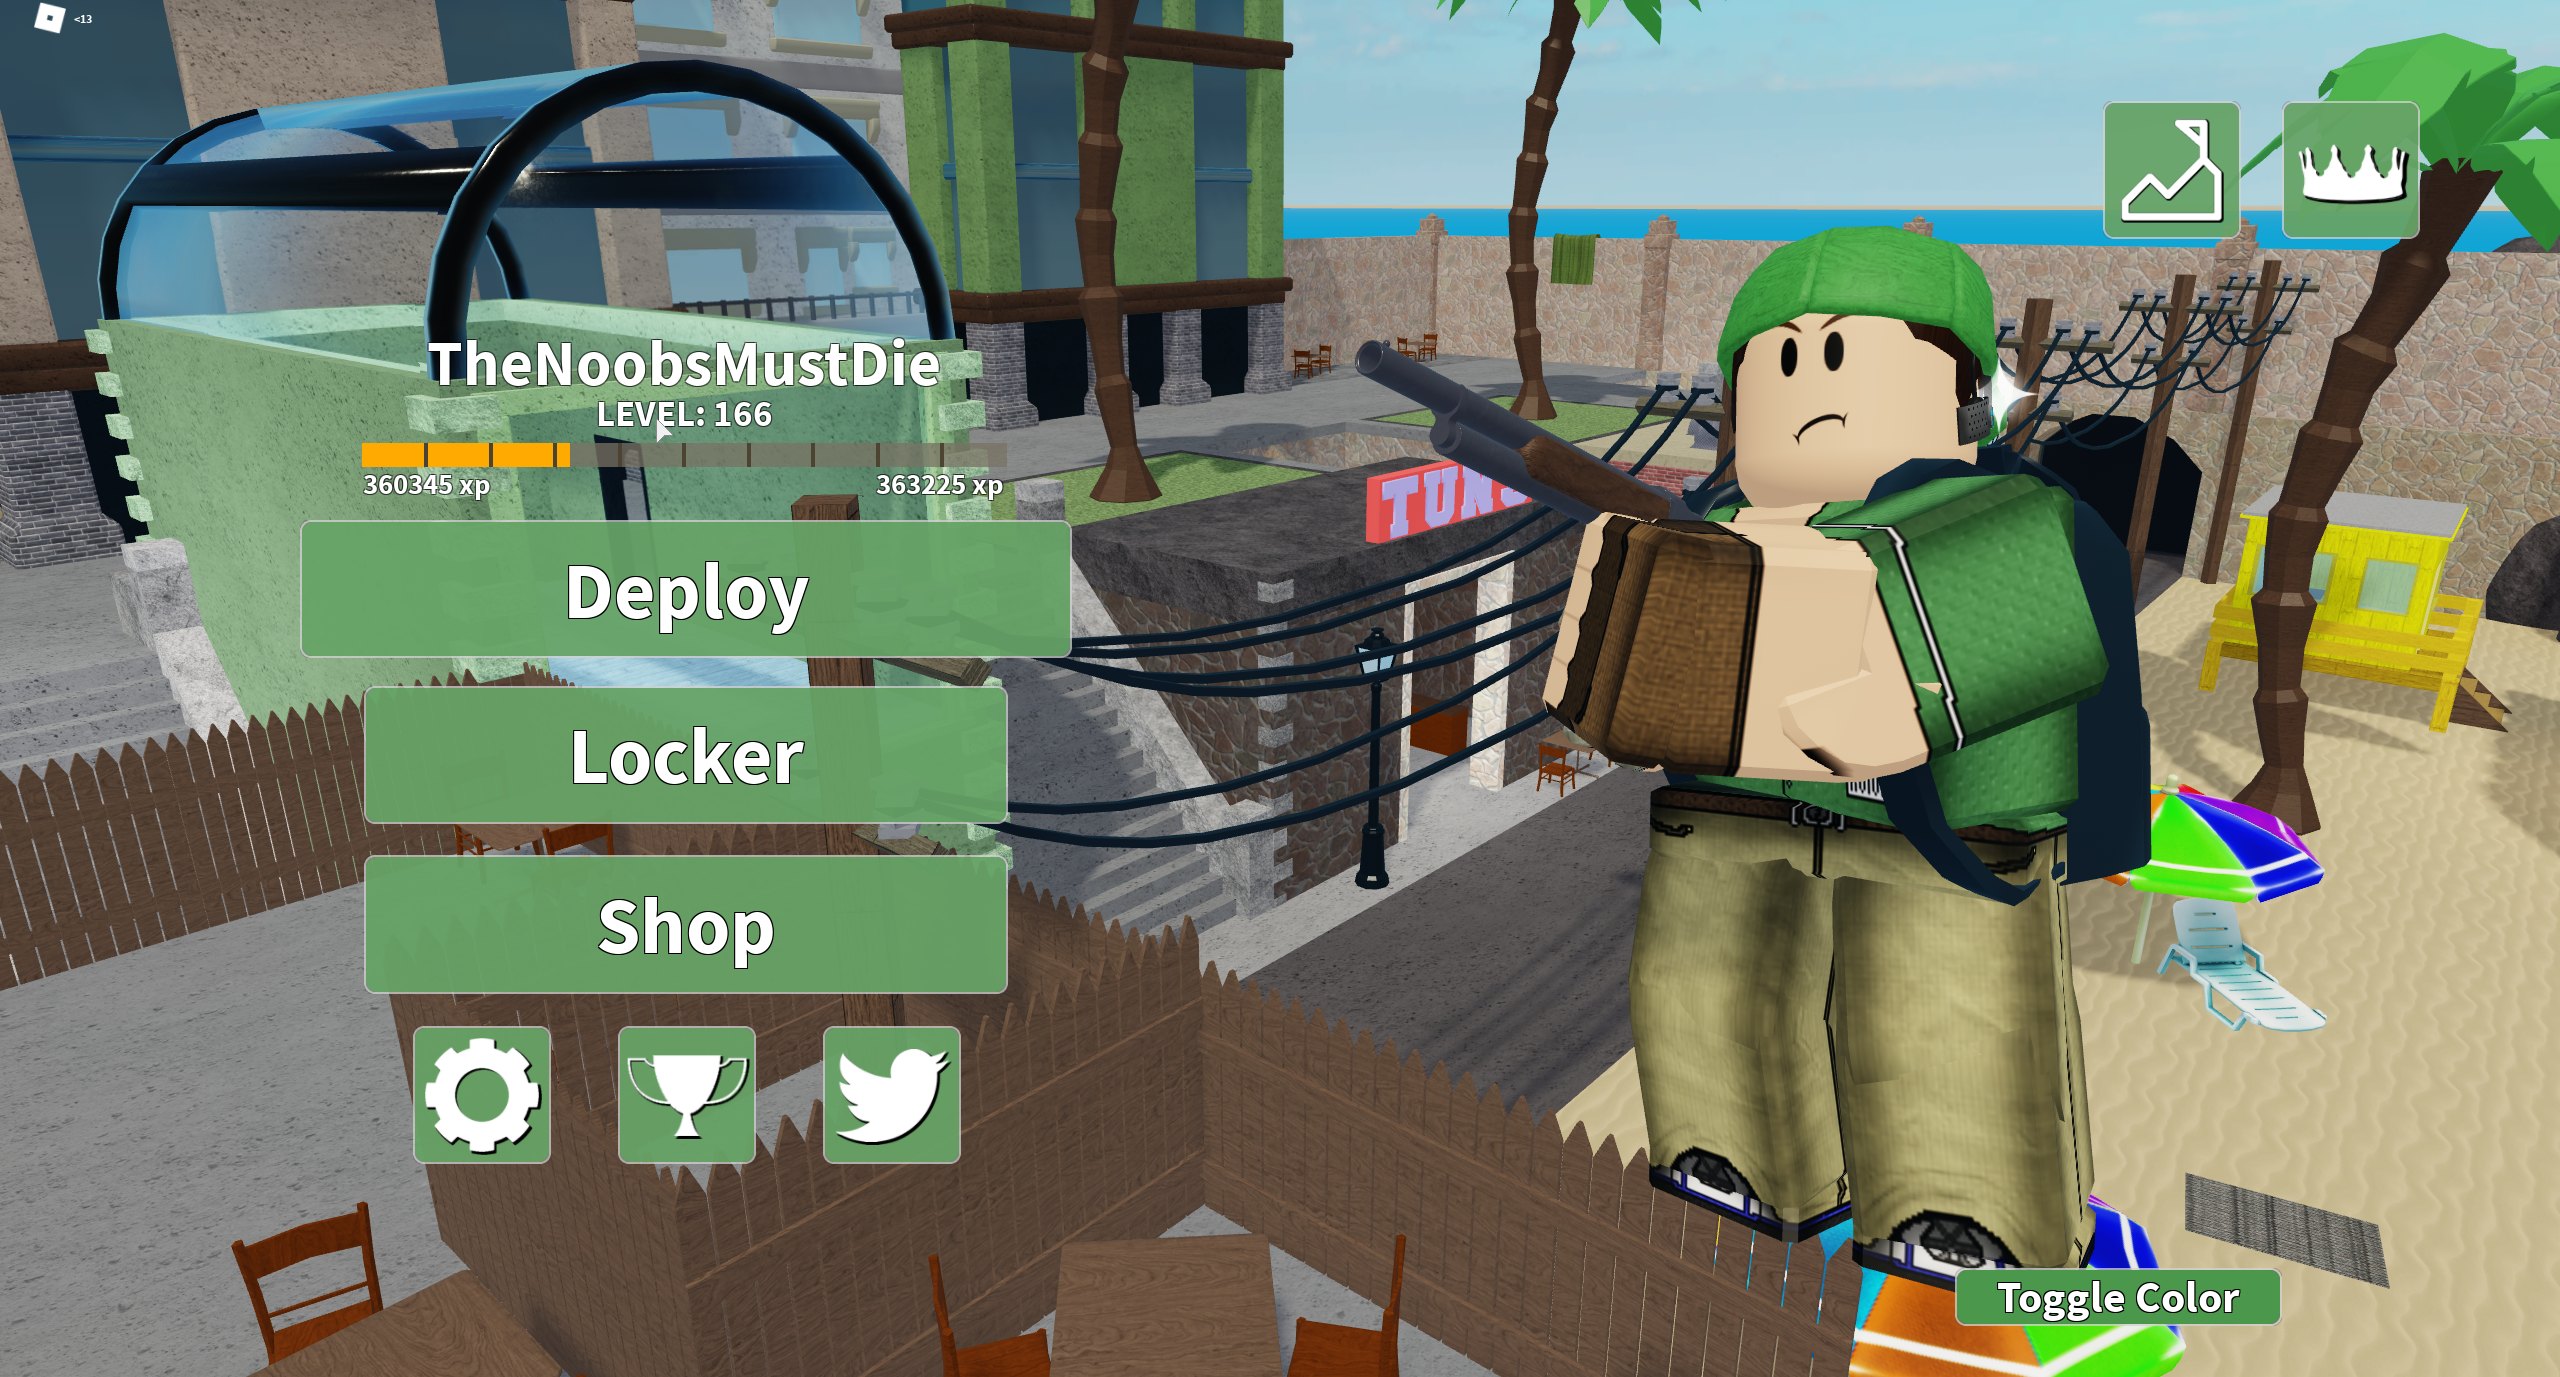 Where Is My Flanker Smirk I M On The Green Team Okay Then Imma Sue Rolve For The Bug Fandom - roblox arsenal flanker